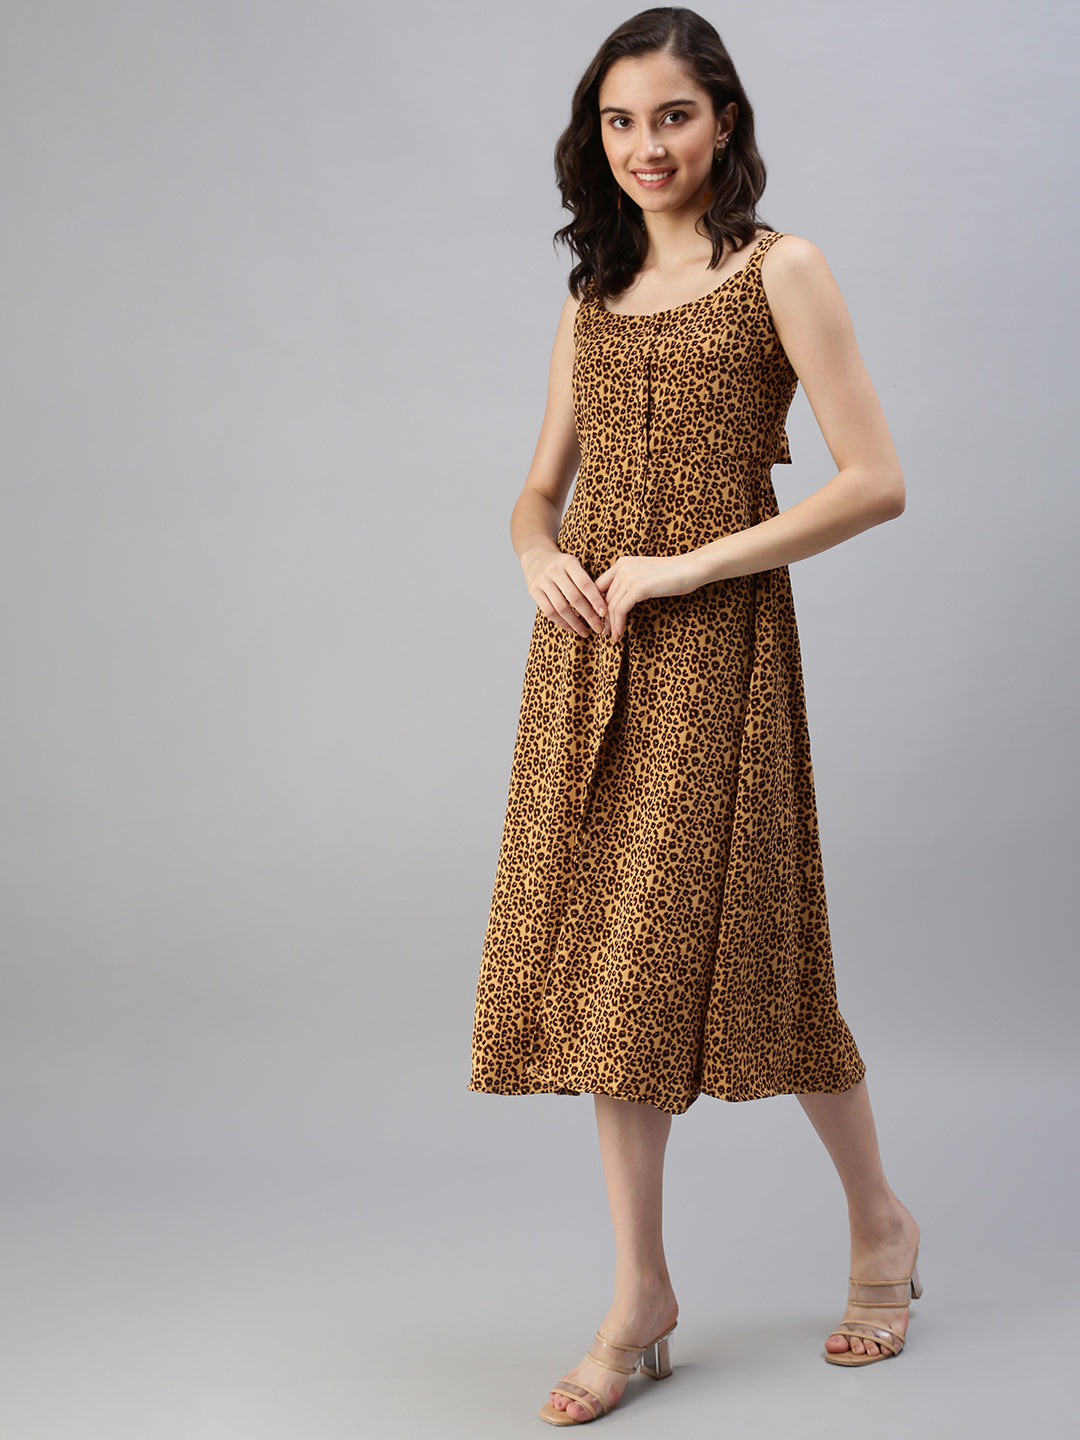 Women's Animal Camel Brown Fit and Flare Dress